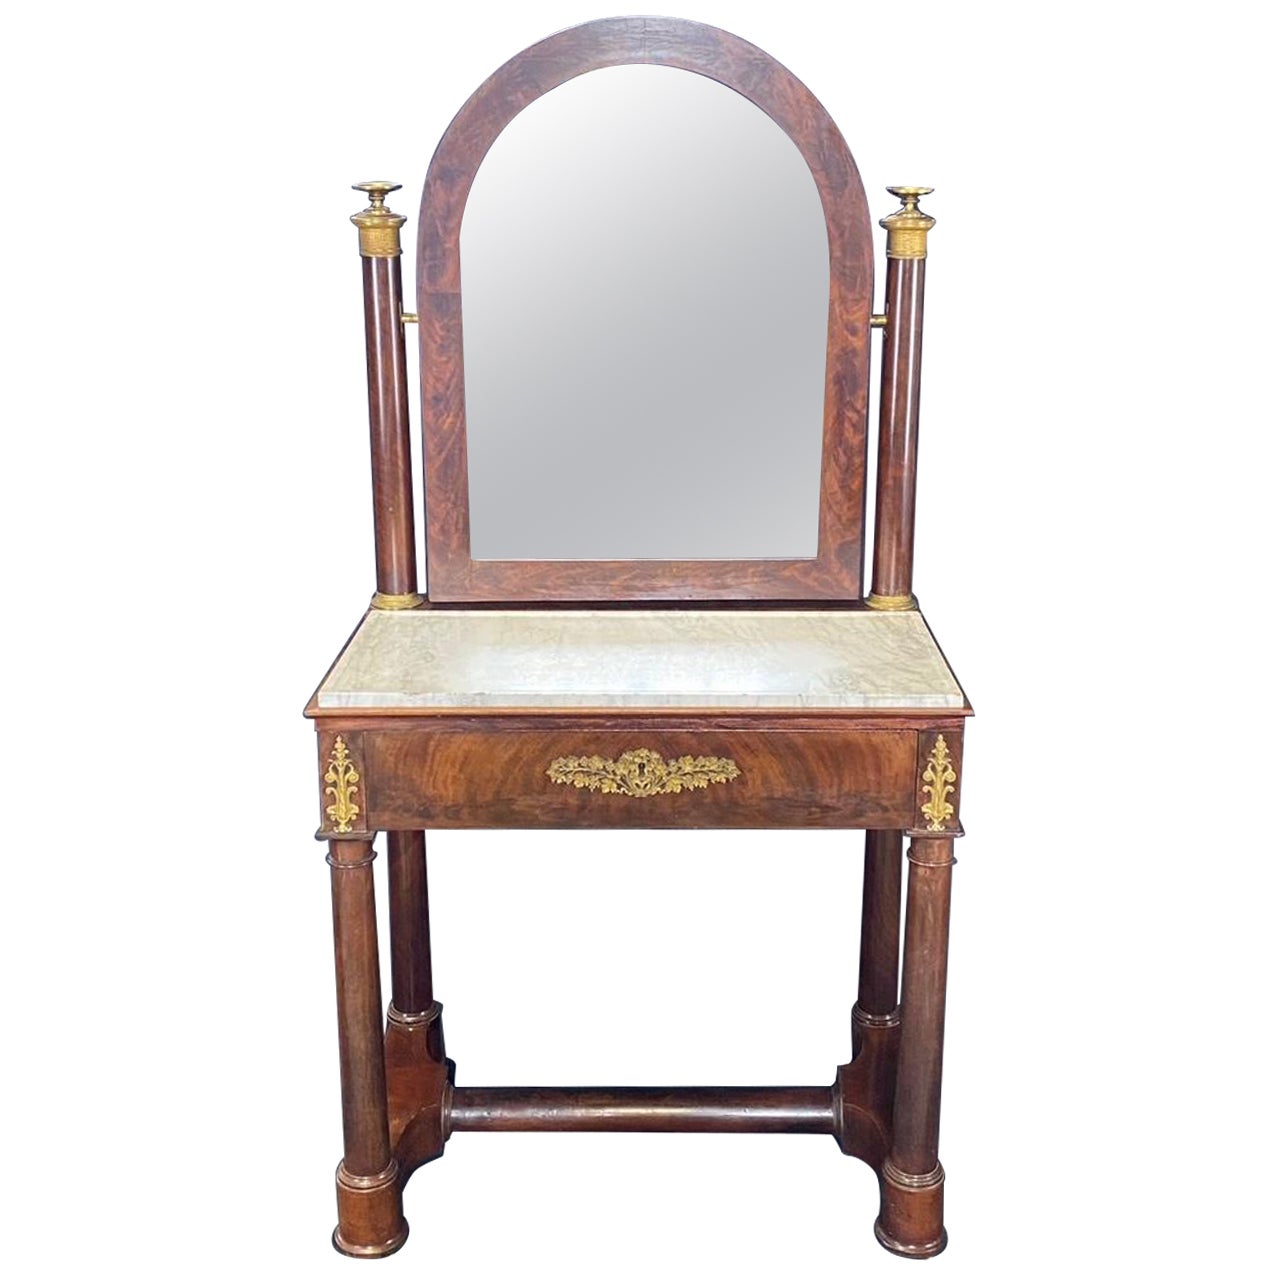 Elegant French 19th Century Empire Vanity with Original Marble Top